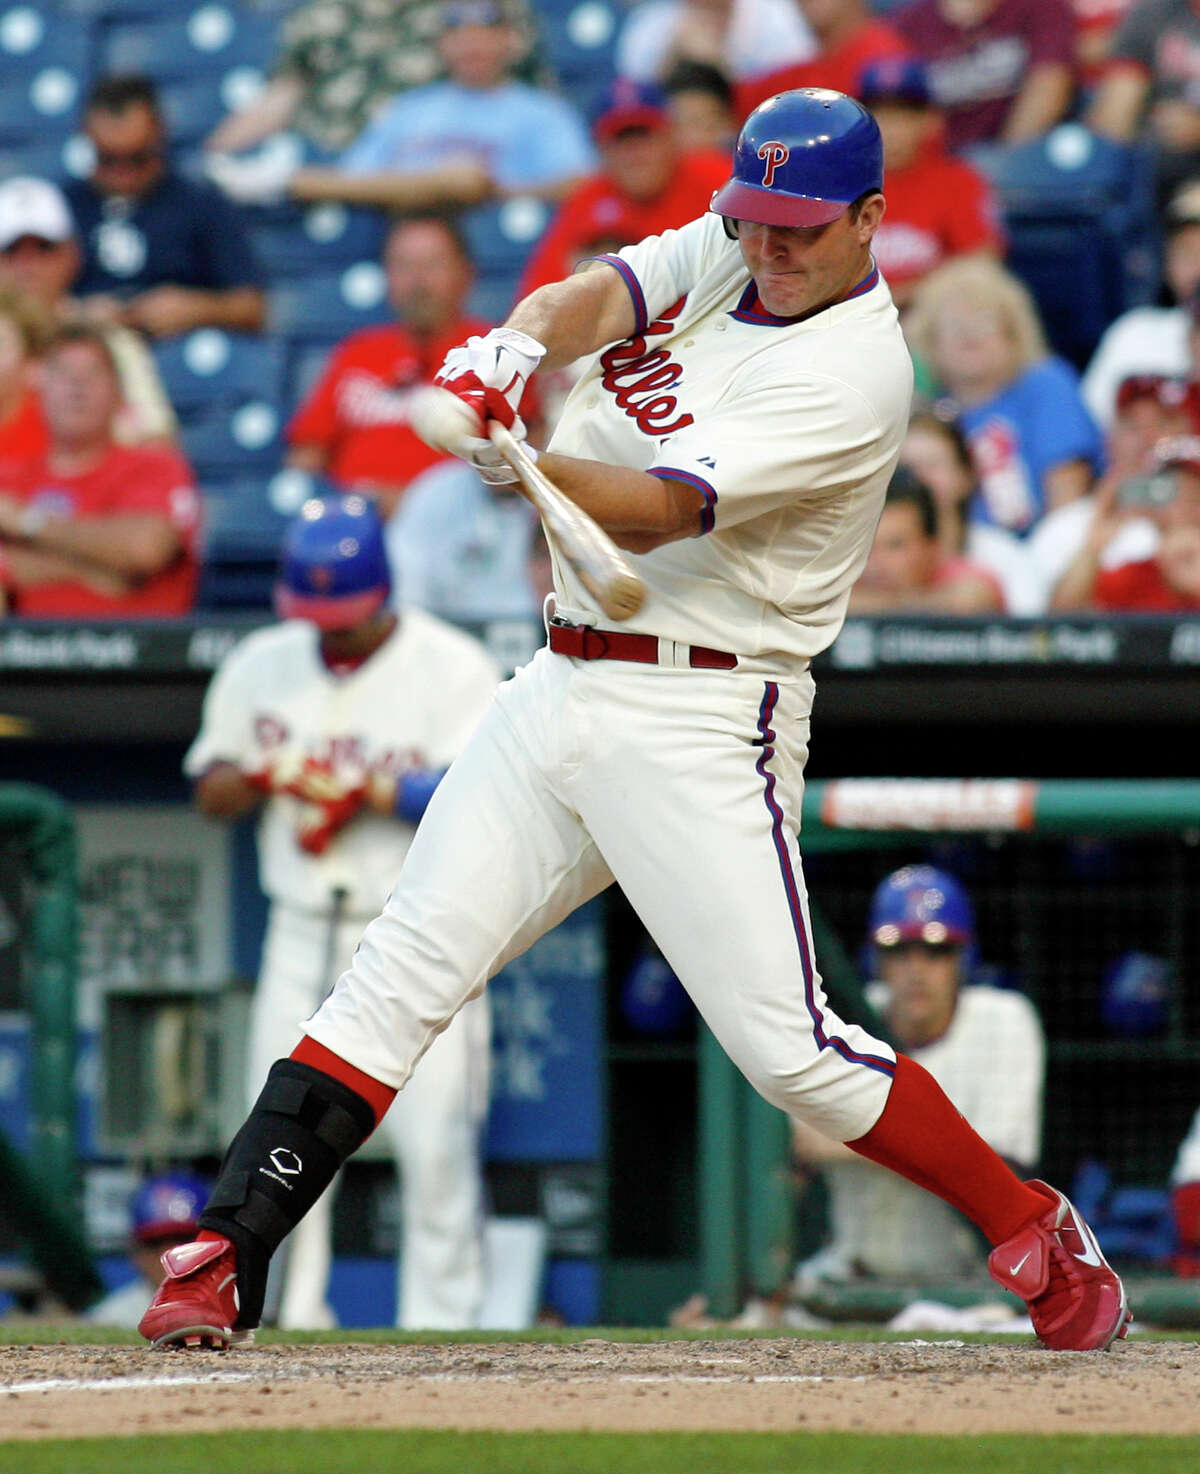 Philadelphia Phillies' Jim Thome hits the game-winning home run against the Tampa Bay Rays in the ninth inning of an interleague baseball game Saturday, June 23, 2012, in Philadelphia. Phillies won 7-6. (AP Photo/H. Rumph Jr)